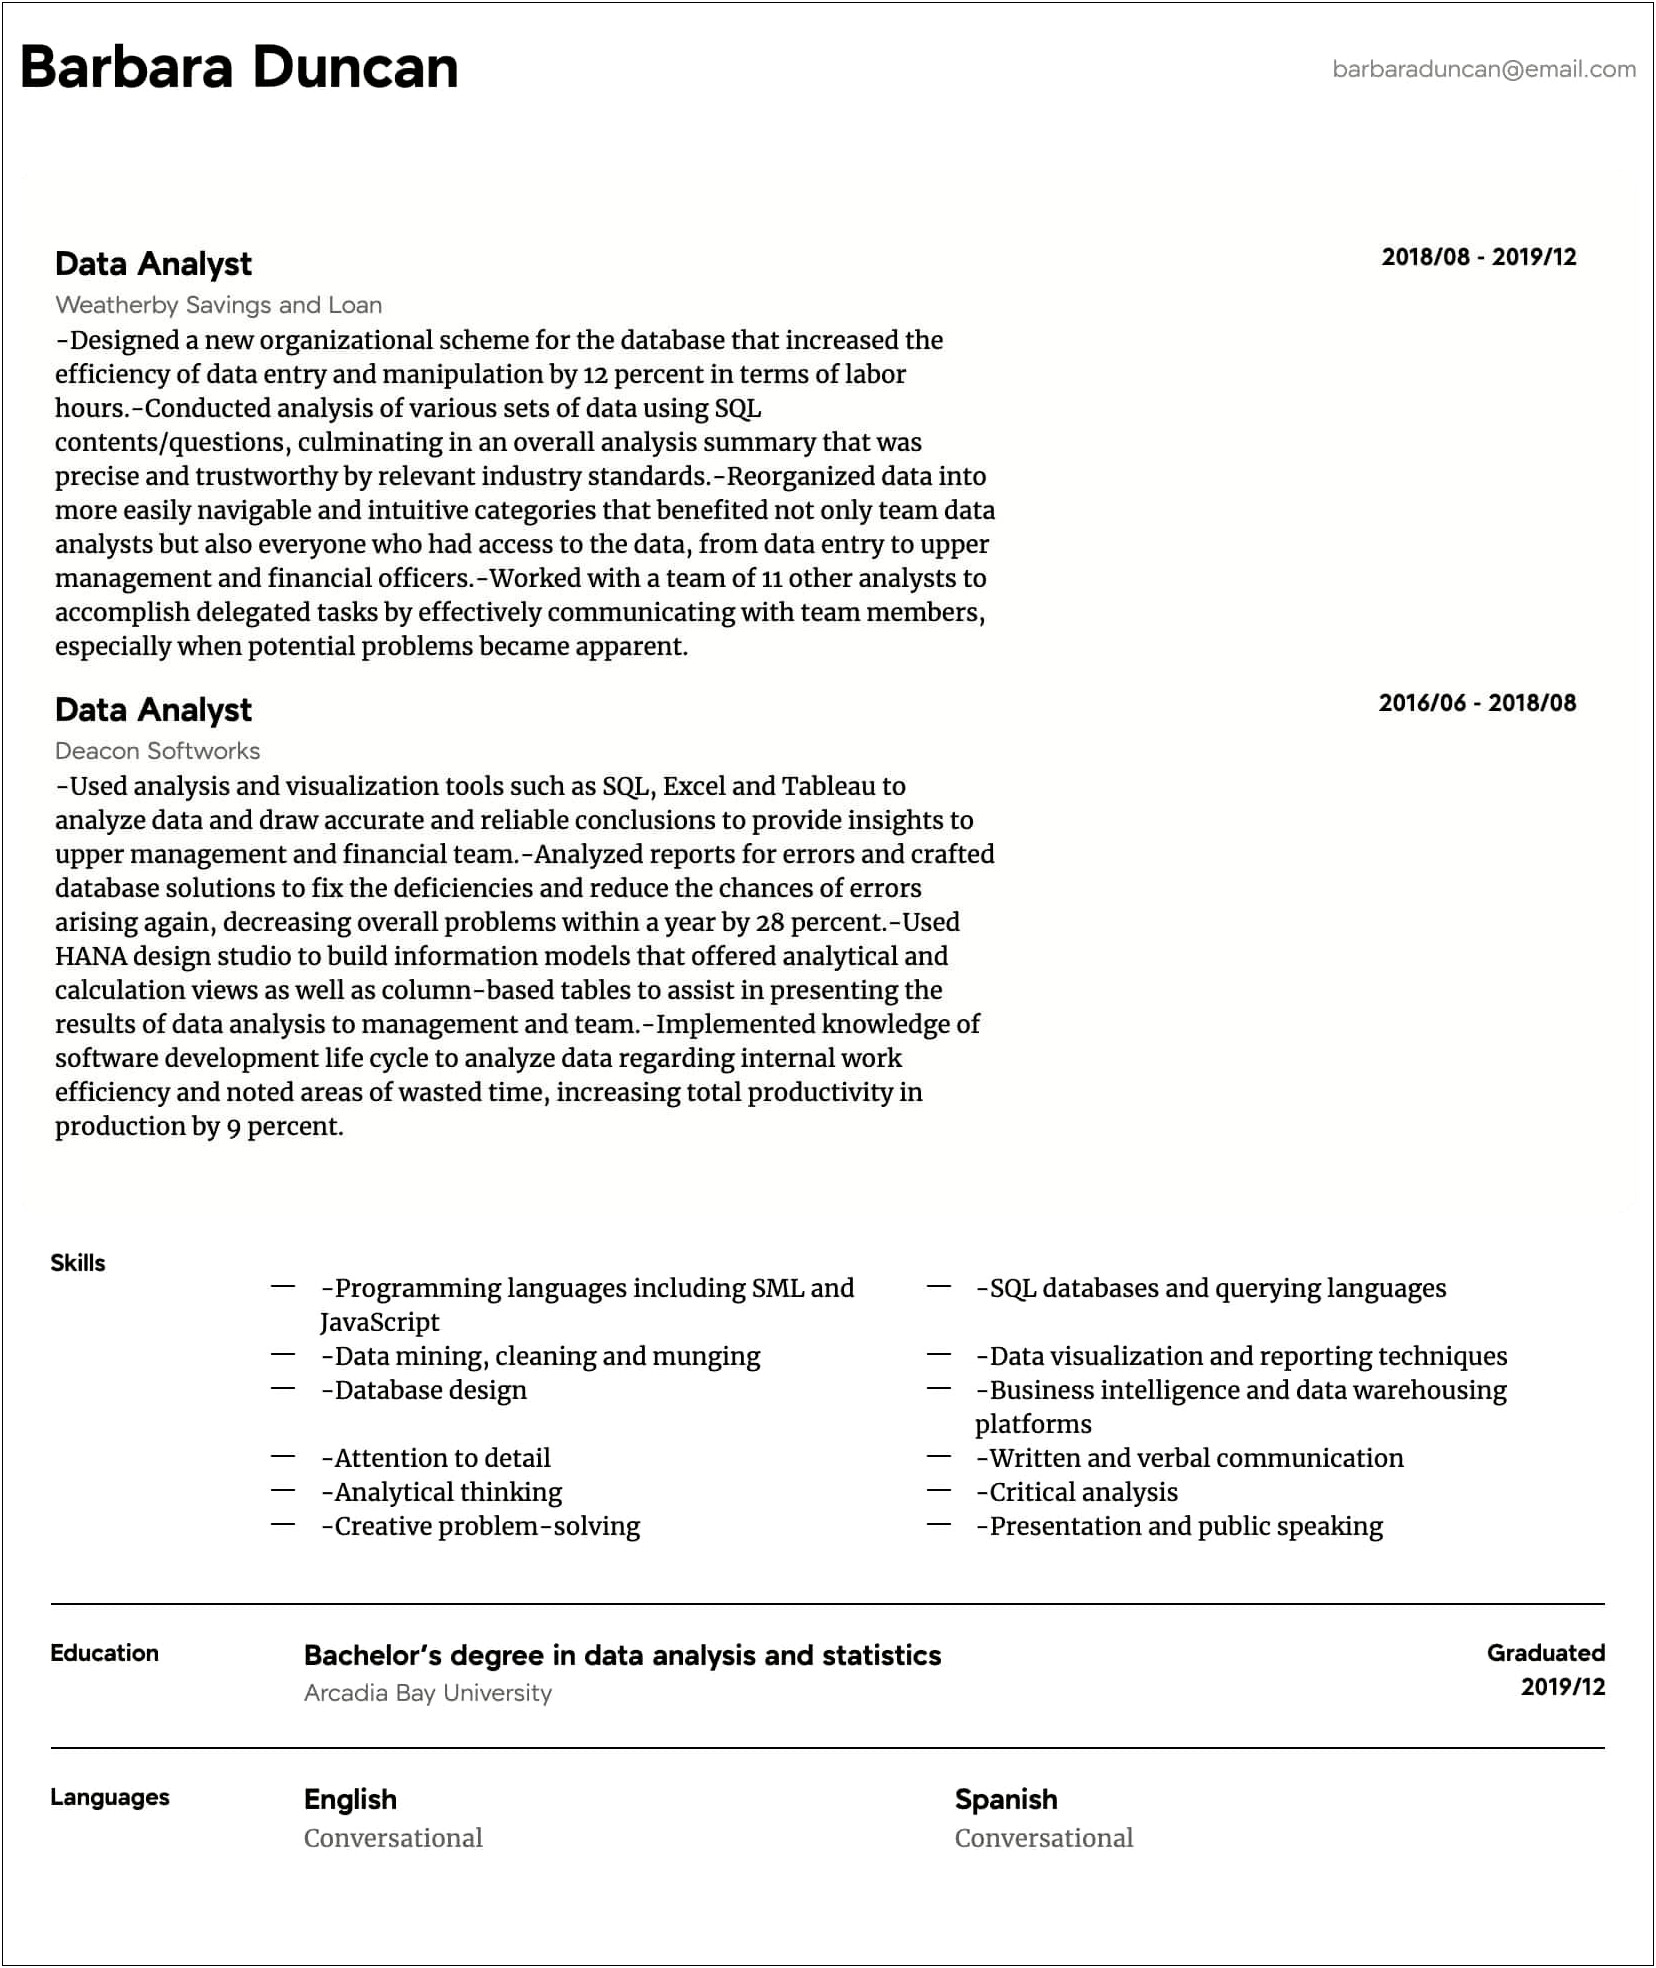 Resume Summary For Business Analyst Examples